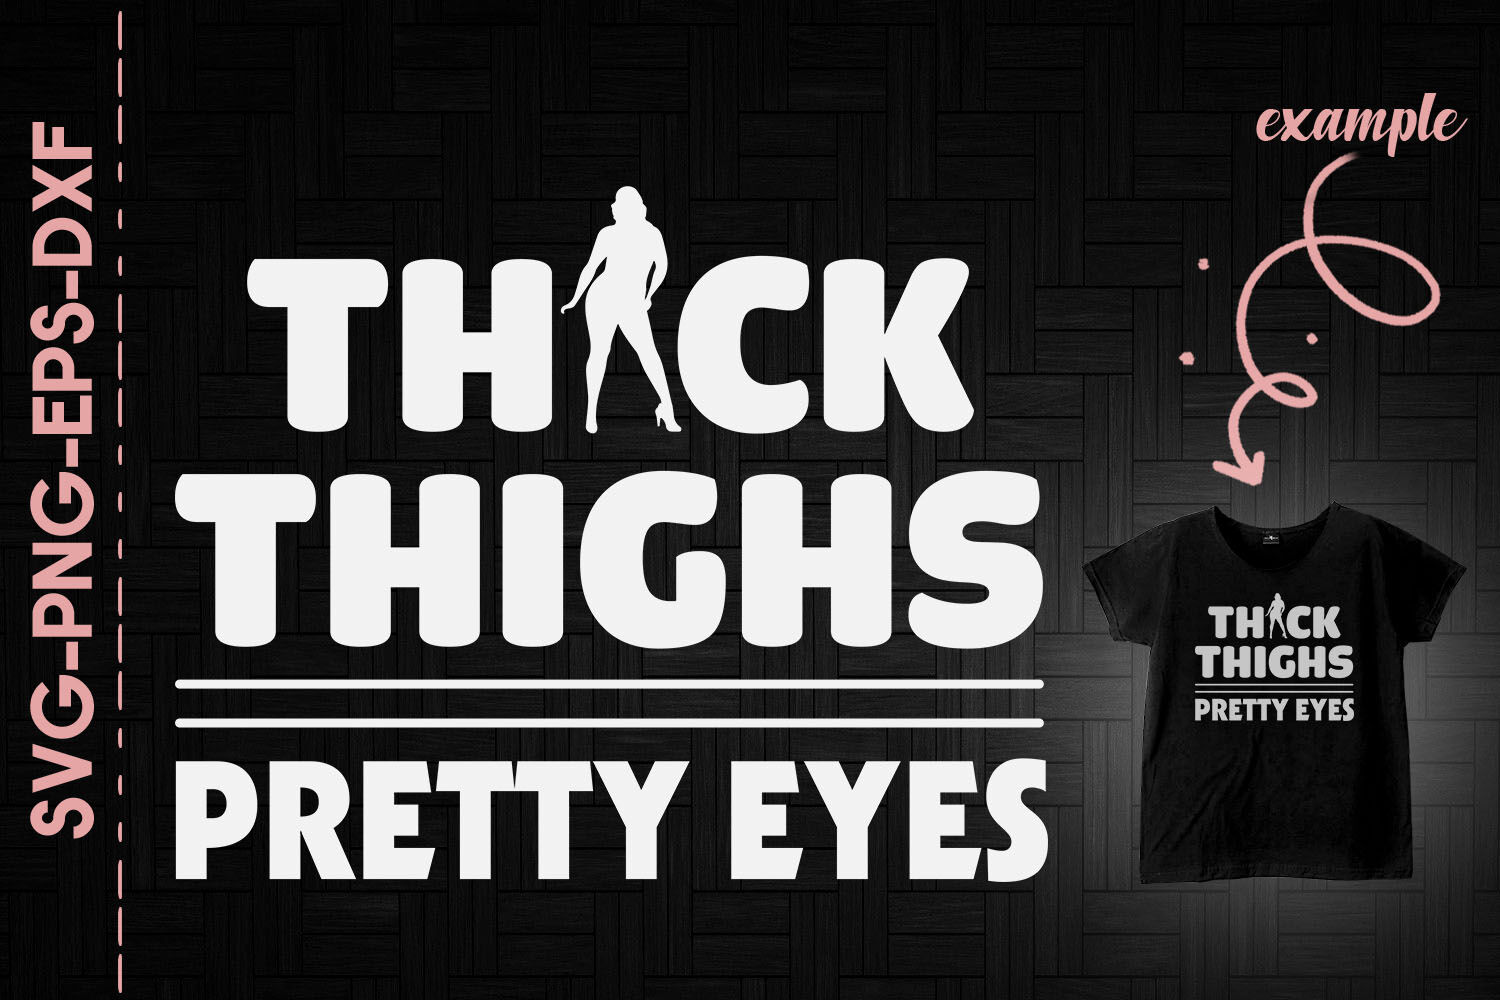 Thick thighs and pretty eyes